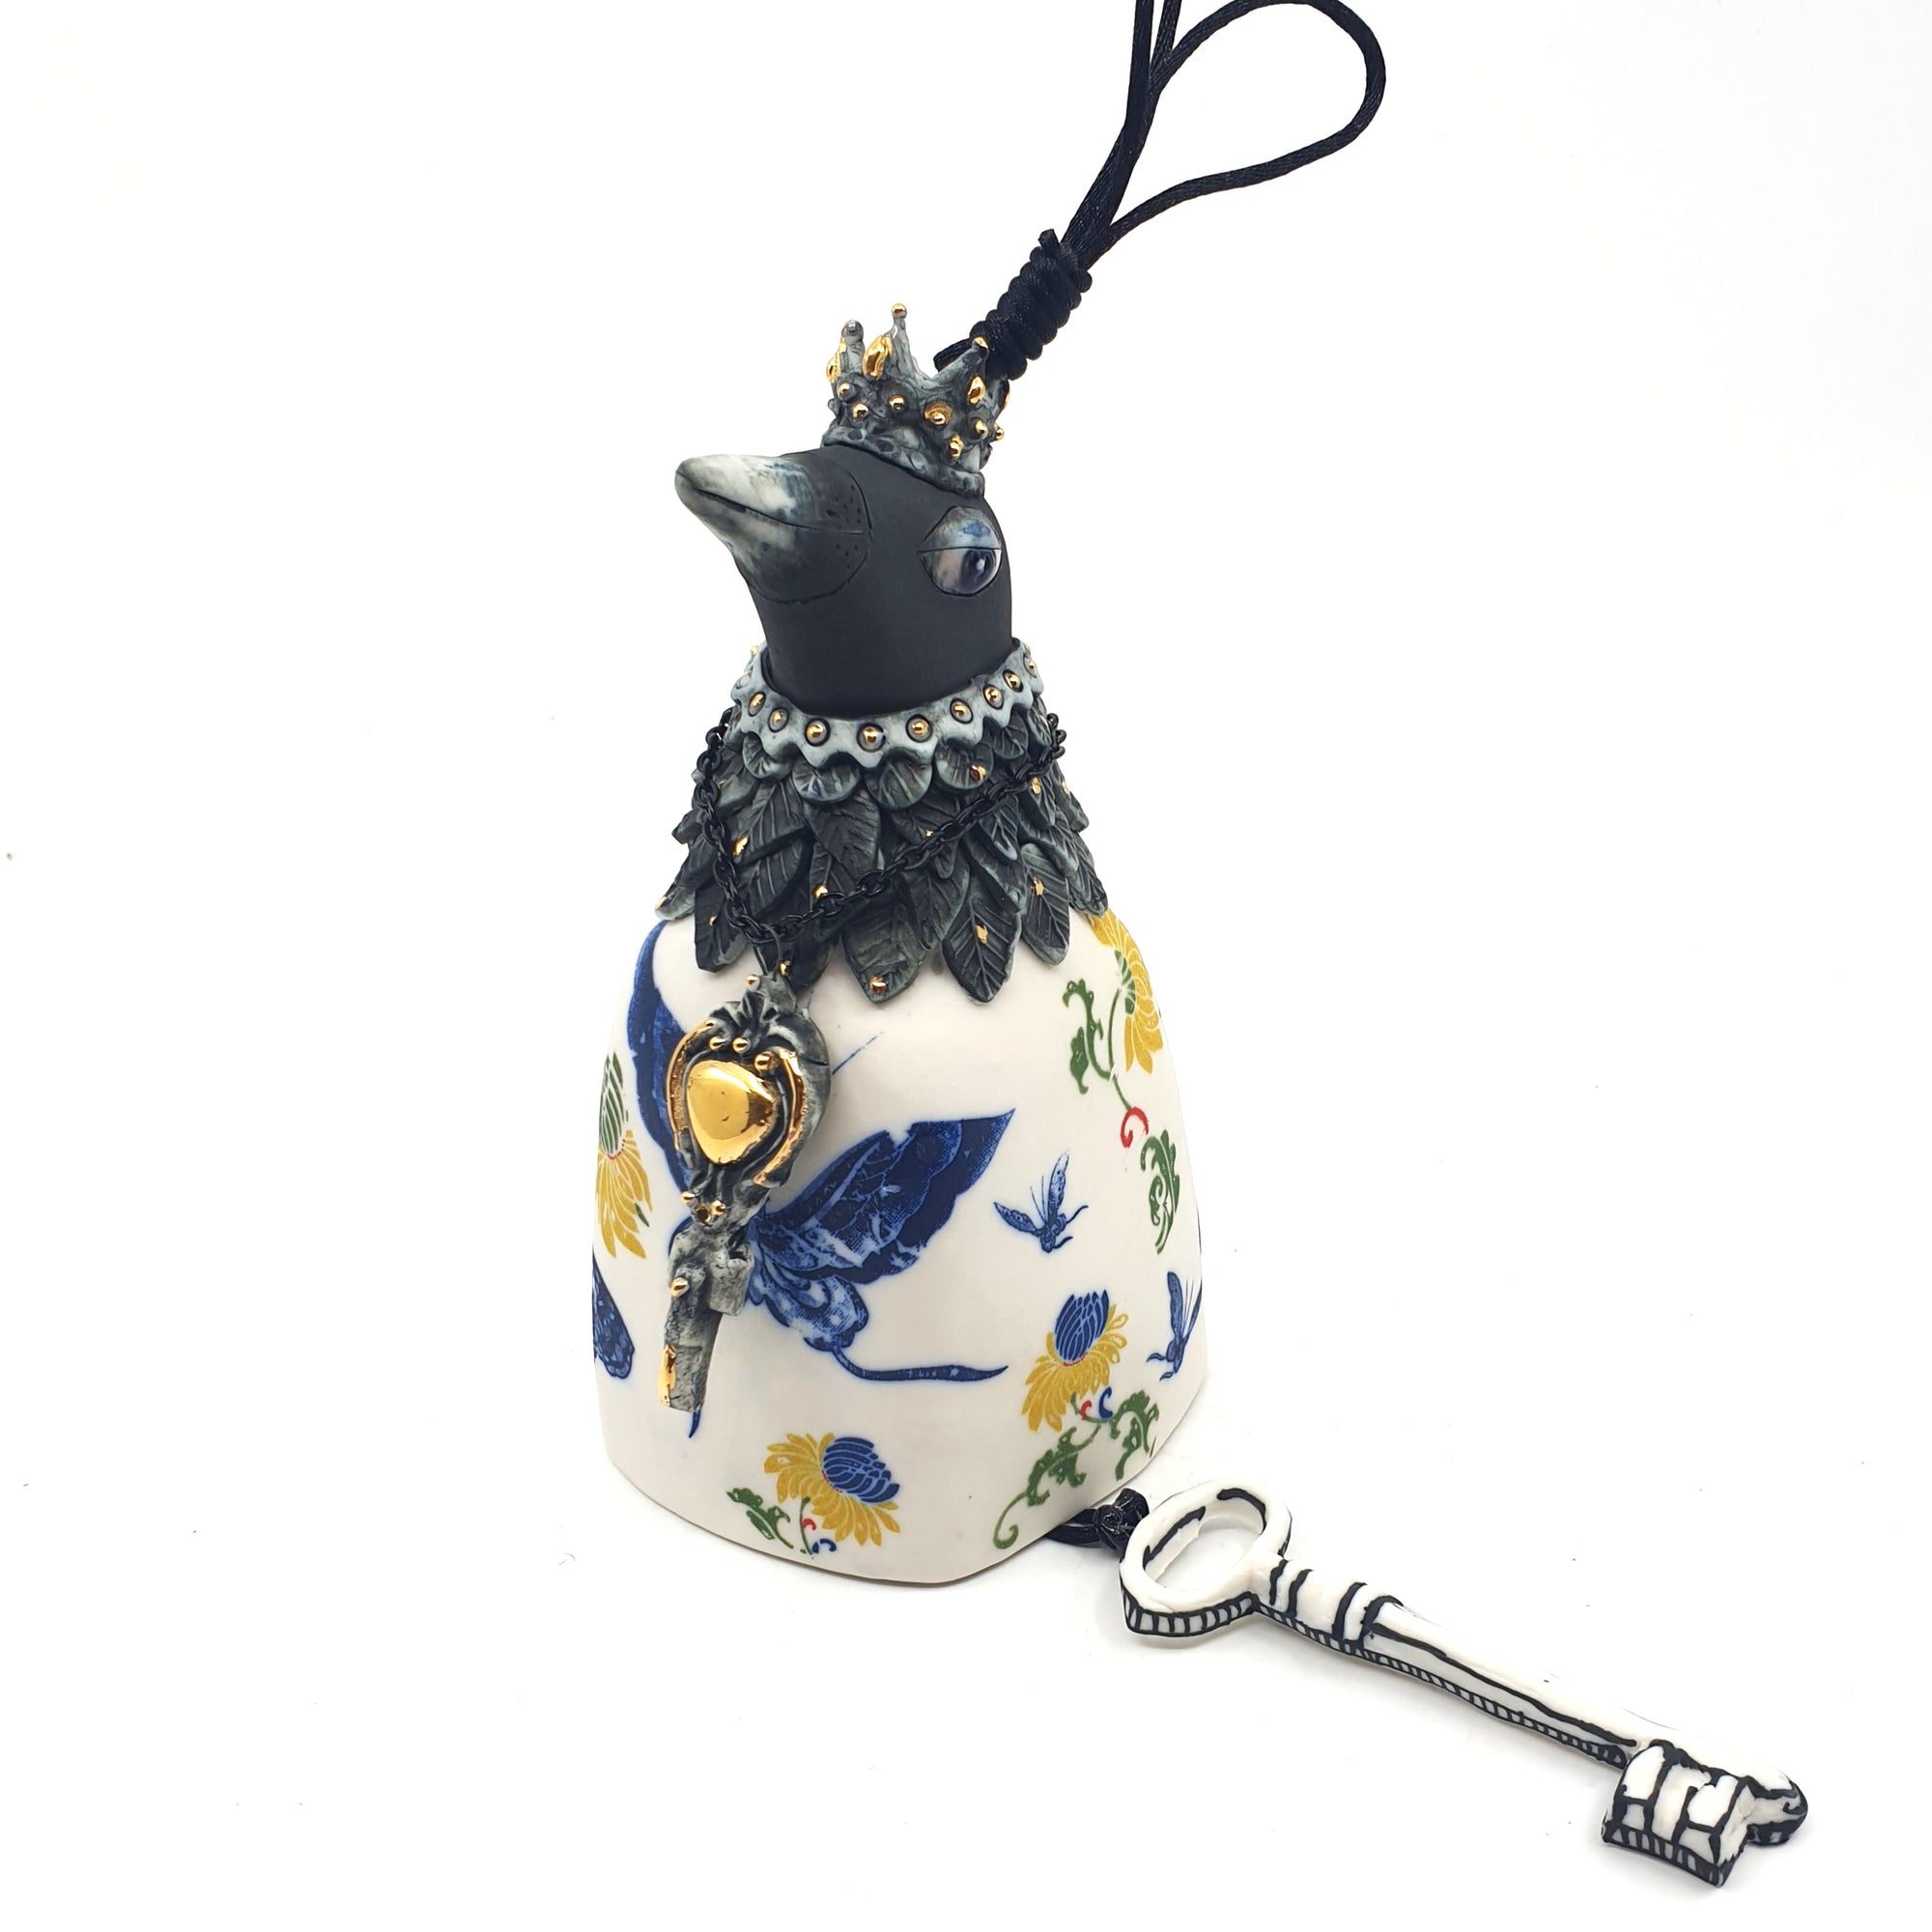 Bird bell with flowers and blue butterflies with gold accents